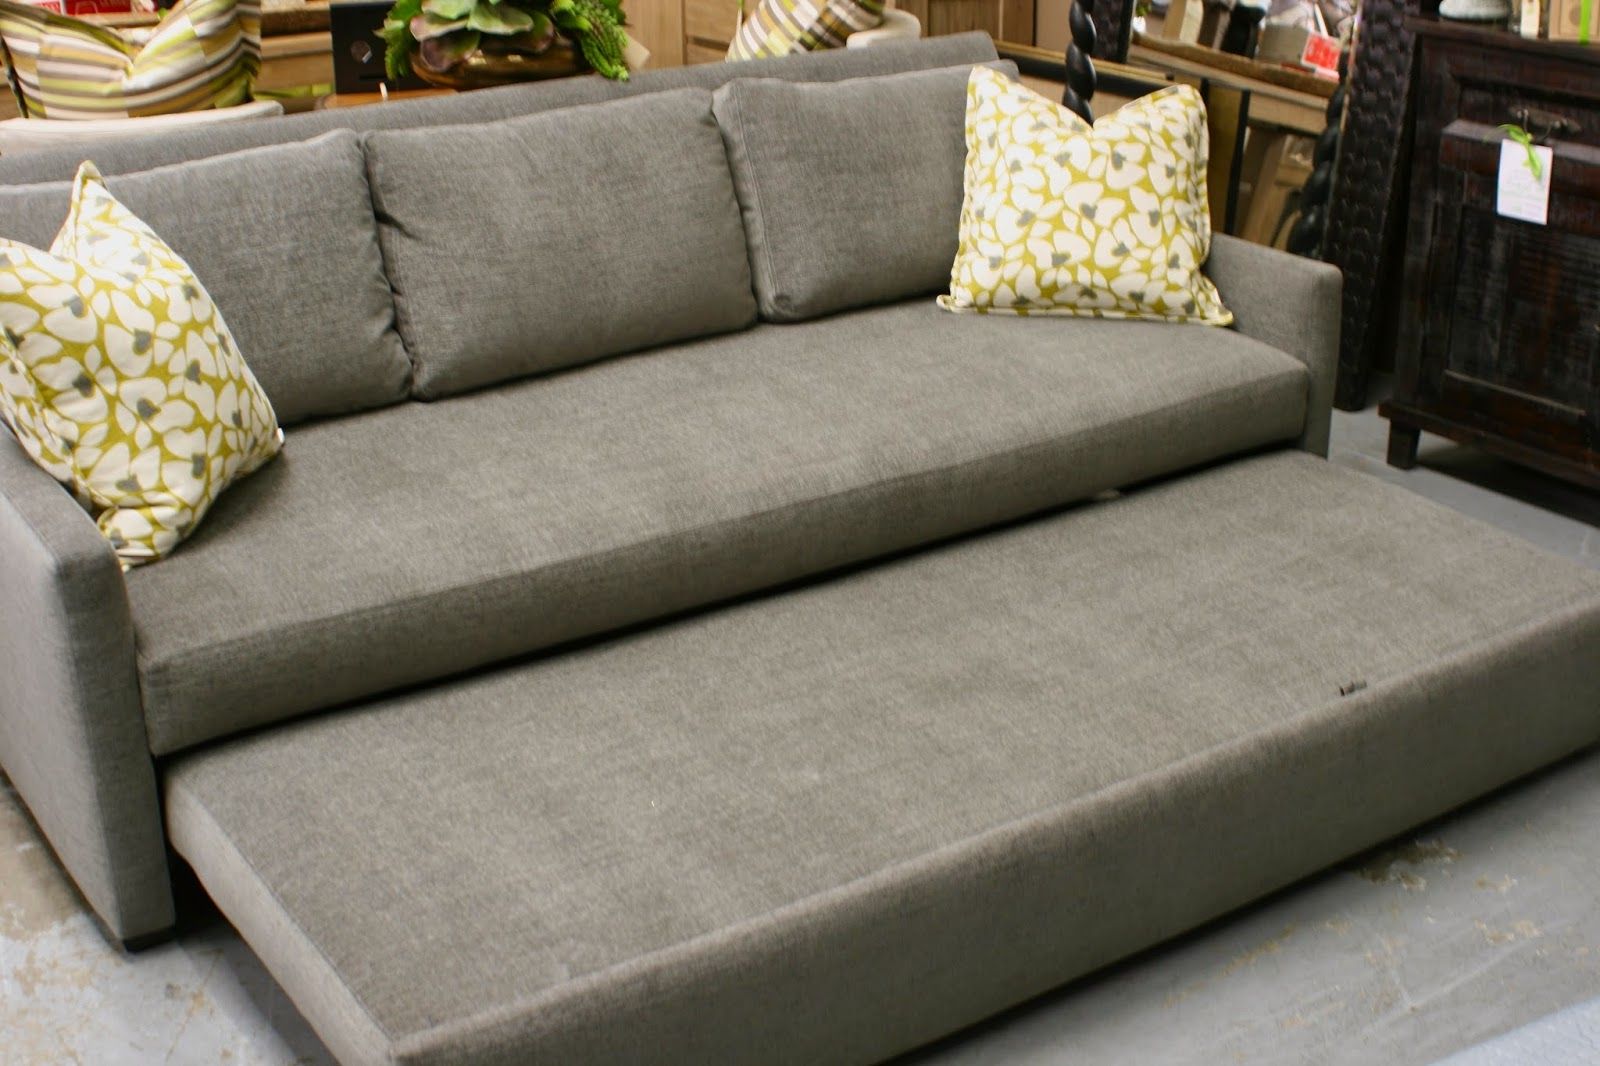 Queen Size Convertible Sofa Bed – Ideas On Foter Pertaining To Most Recent Queen Size Convertible Sofa Beds (View 2 of 15)